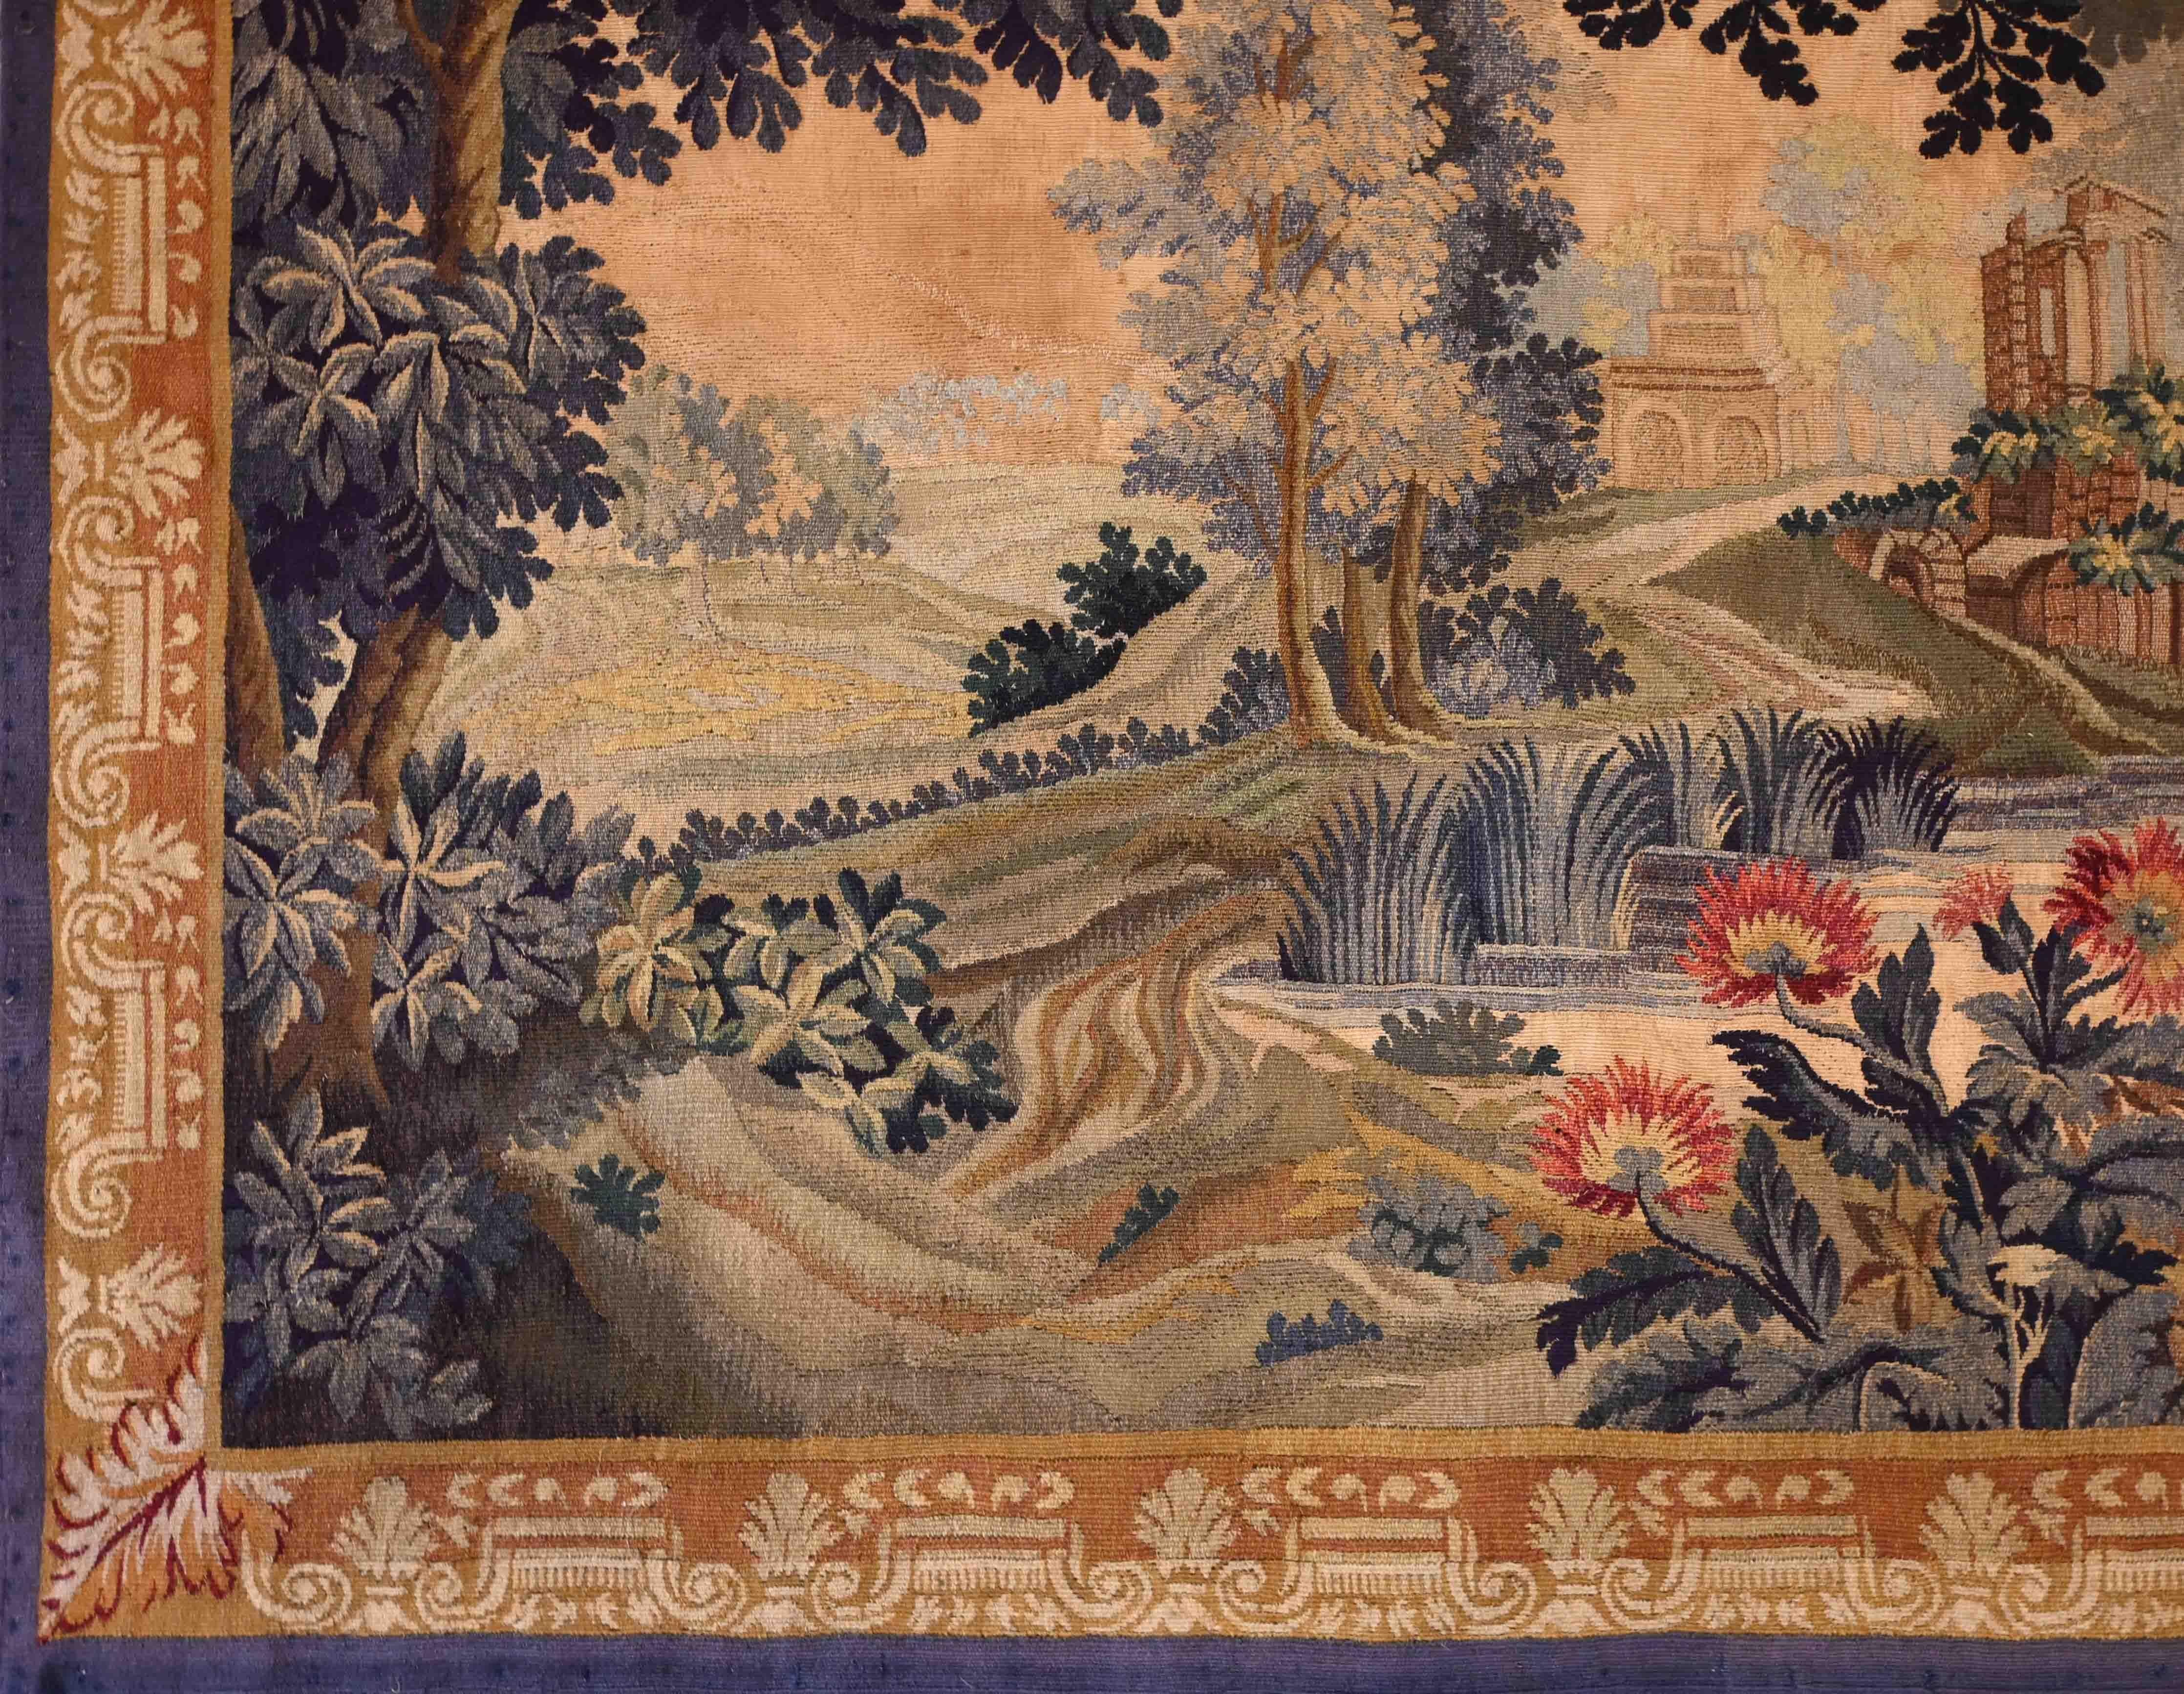 Hand-Woven Greenery French Aubusson Tapestry 19th century - L1m76xH1m48 - No. 1384